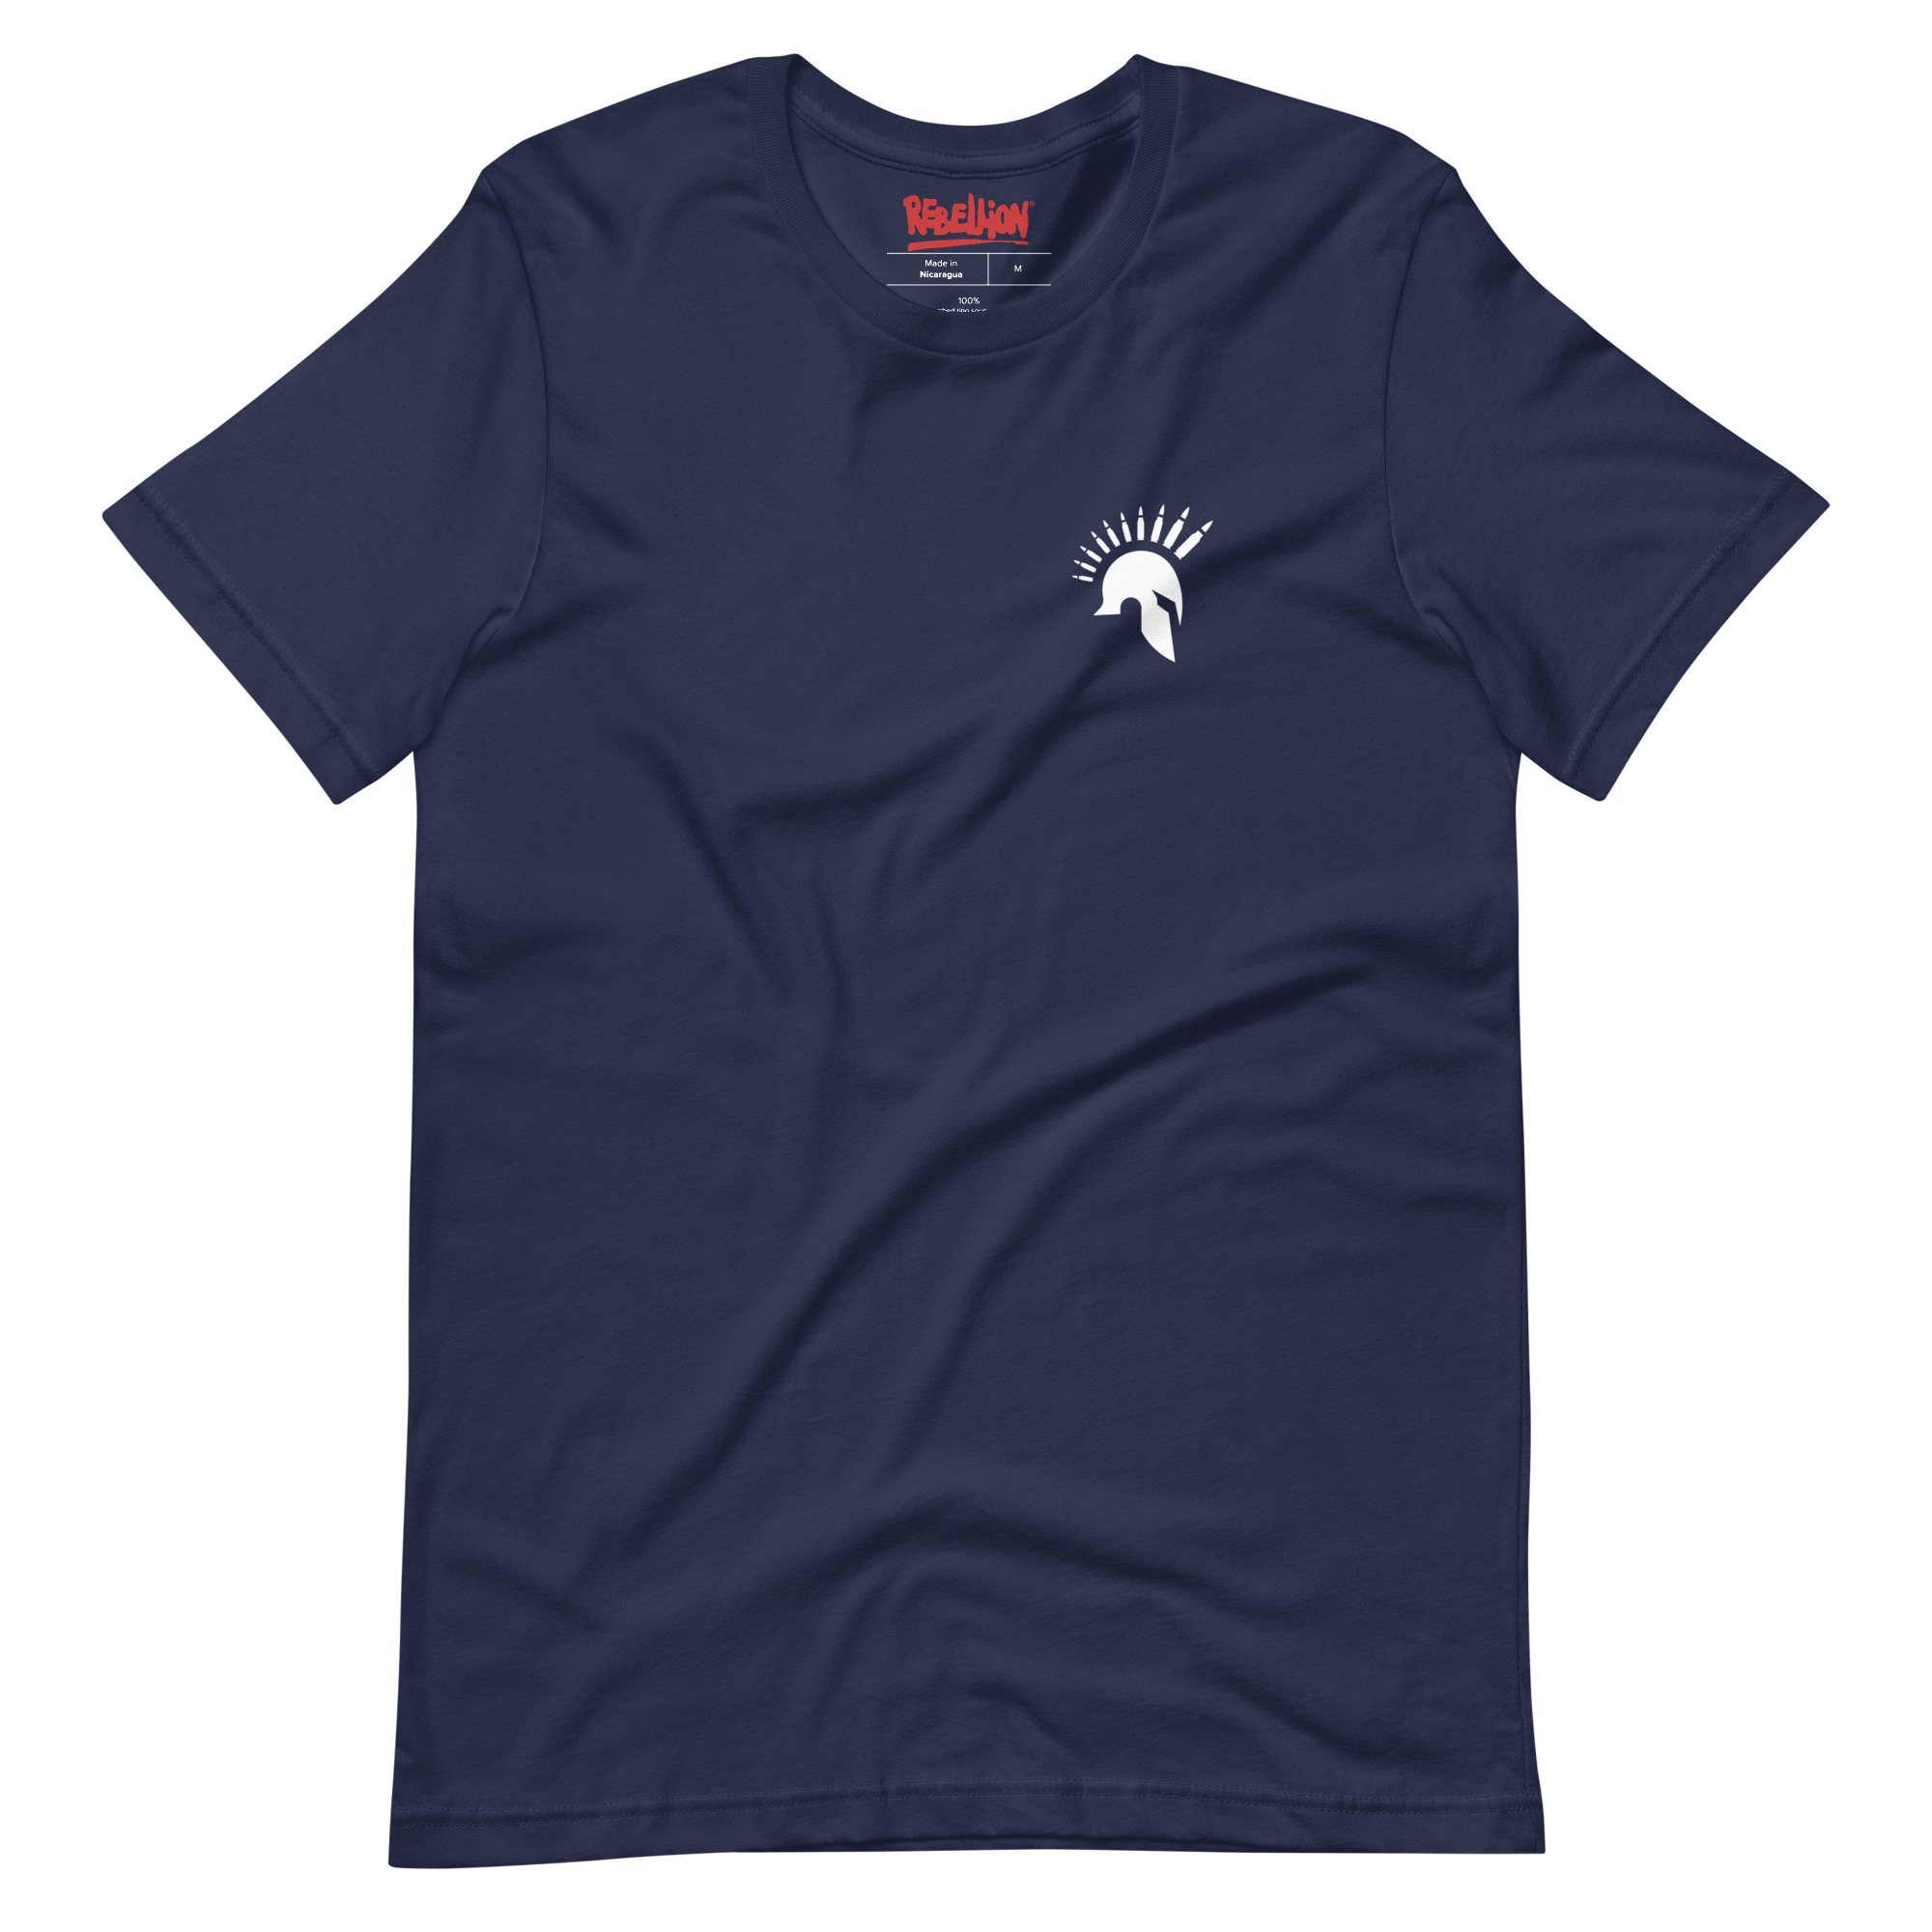 Image of a Navy coloured Sniper Elite 5 t-shirt featuring a small Warriors emblem on the left breast pocket